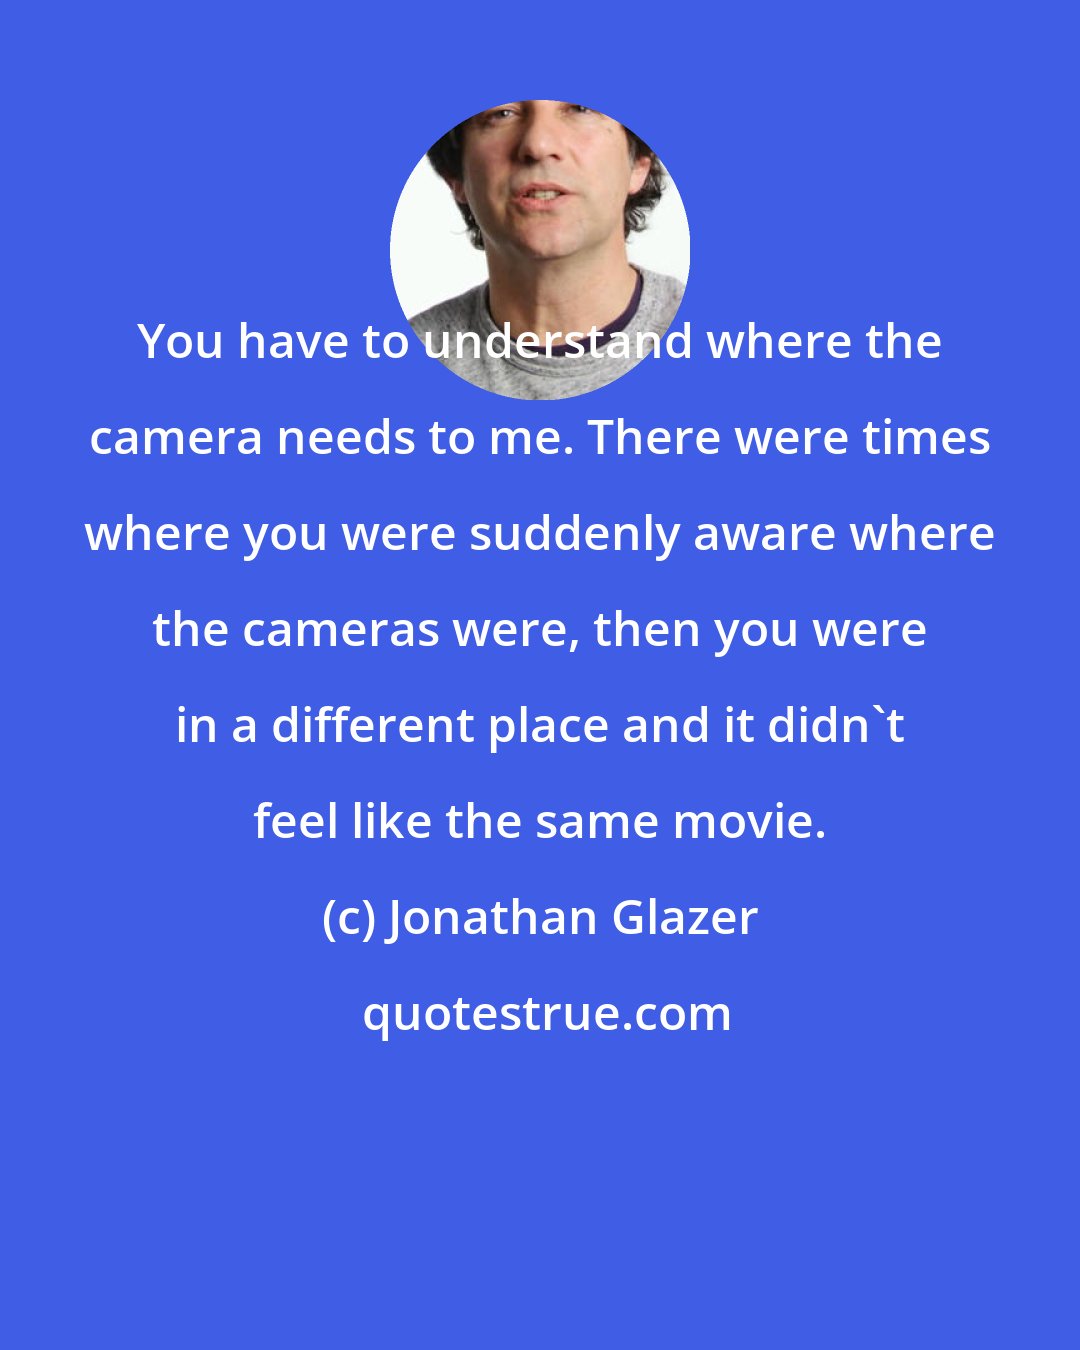 Jonathan Glazer: You have to understand where the camera needs to me. There were times where you were suddenly aware where the cameras were, then you were in a different place and it didn't feel like the same movie.